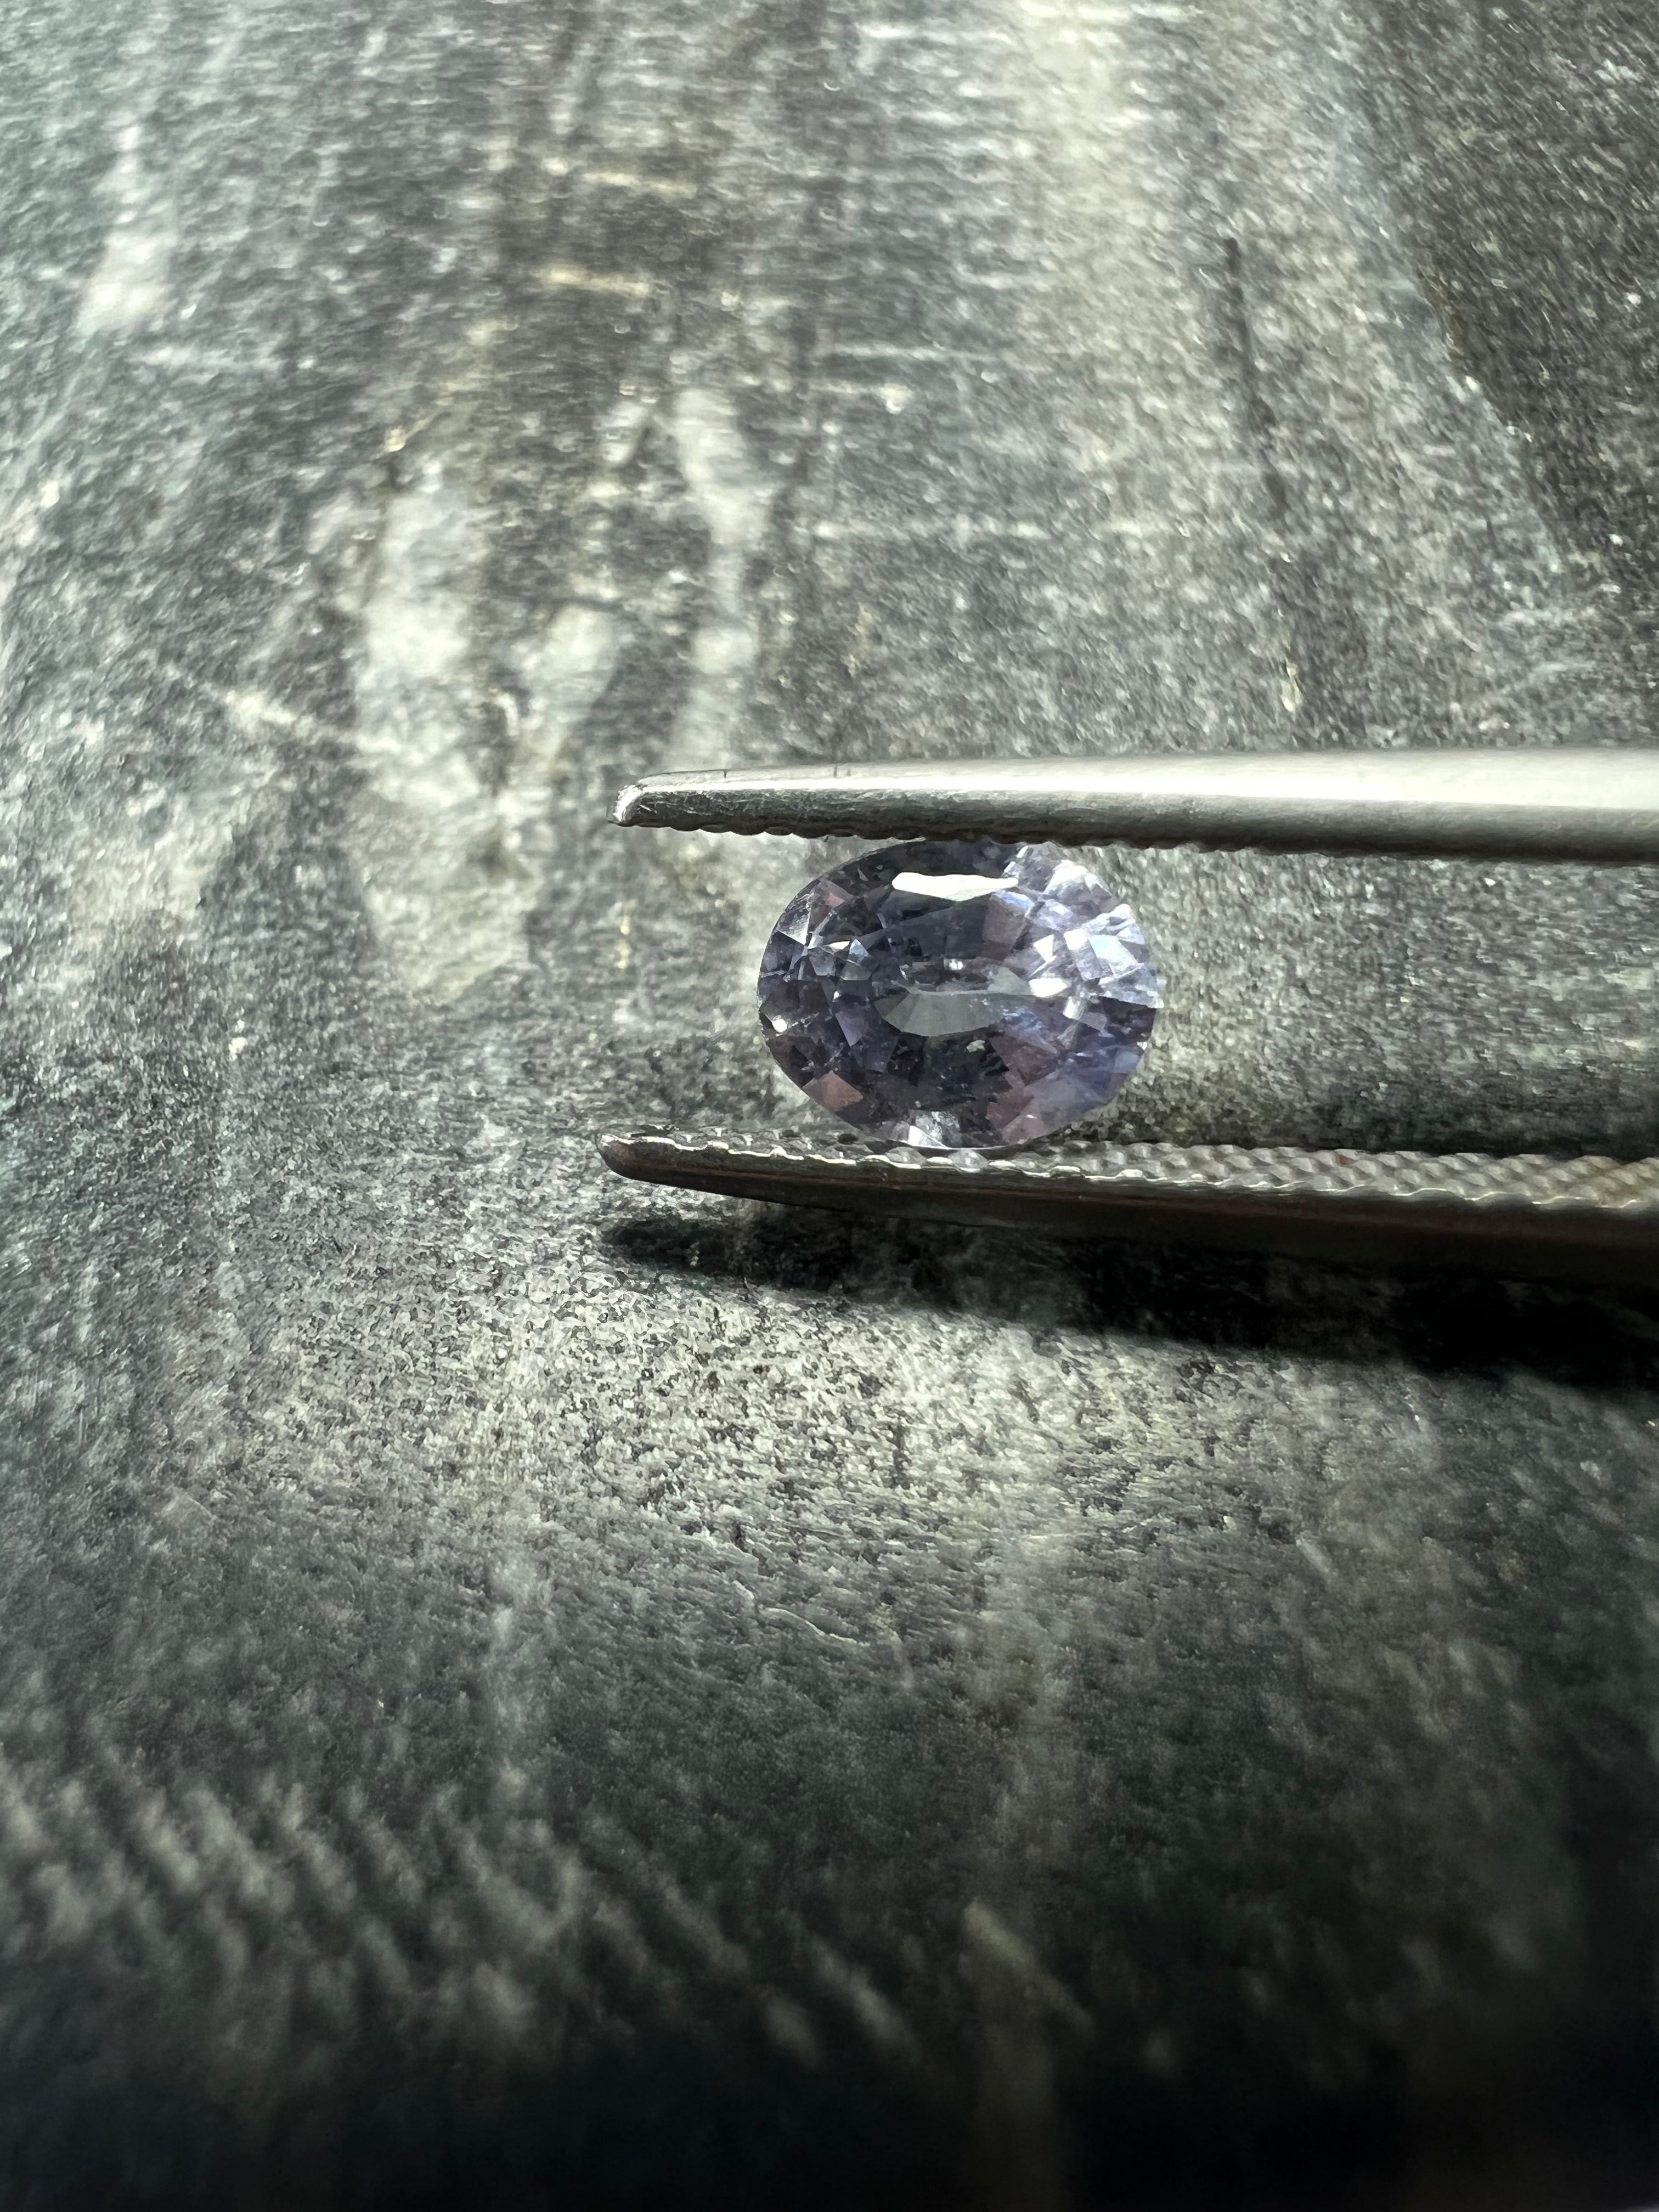 .48CT Loose Oval Blue Sapphire 5.36x4.28x2.9mm Earth mined Gemstone